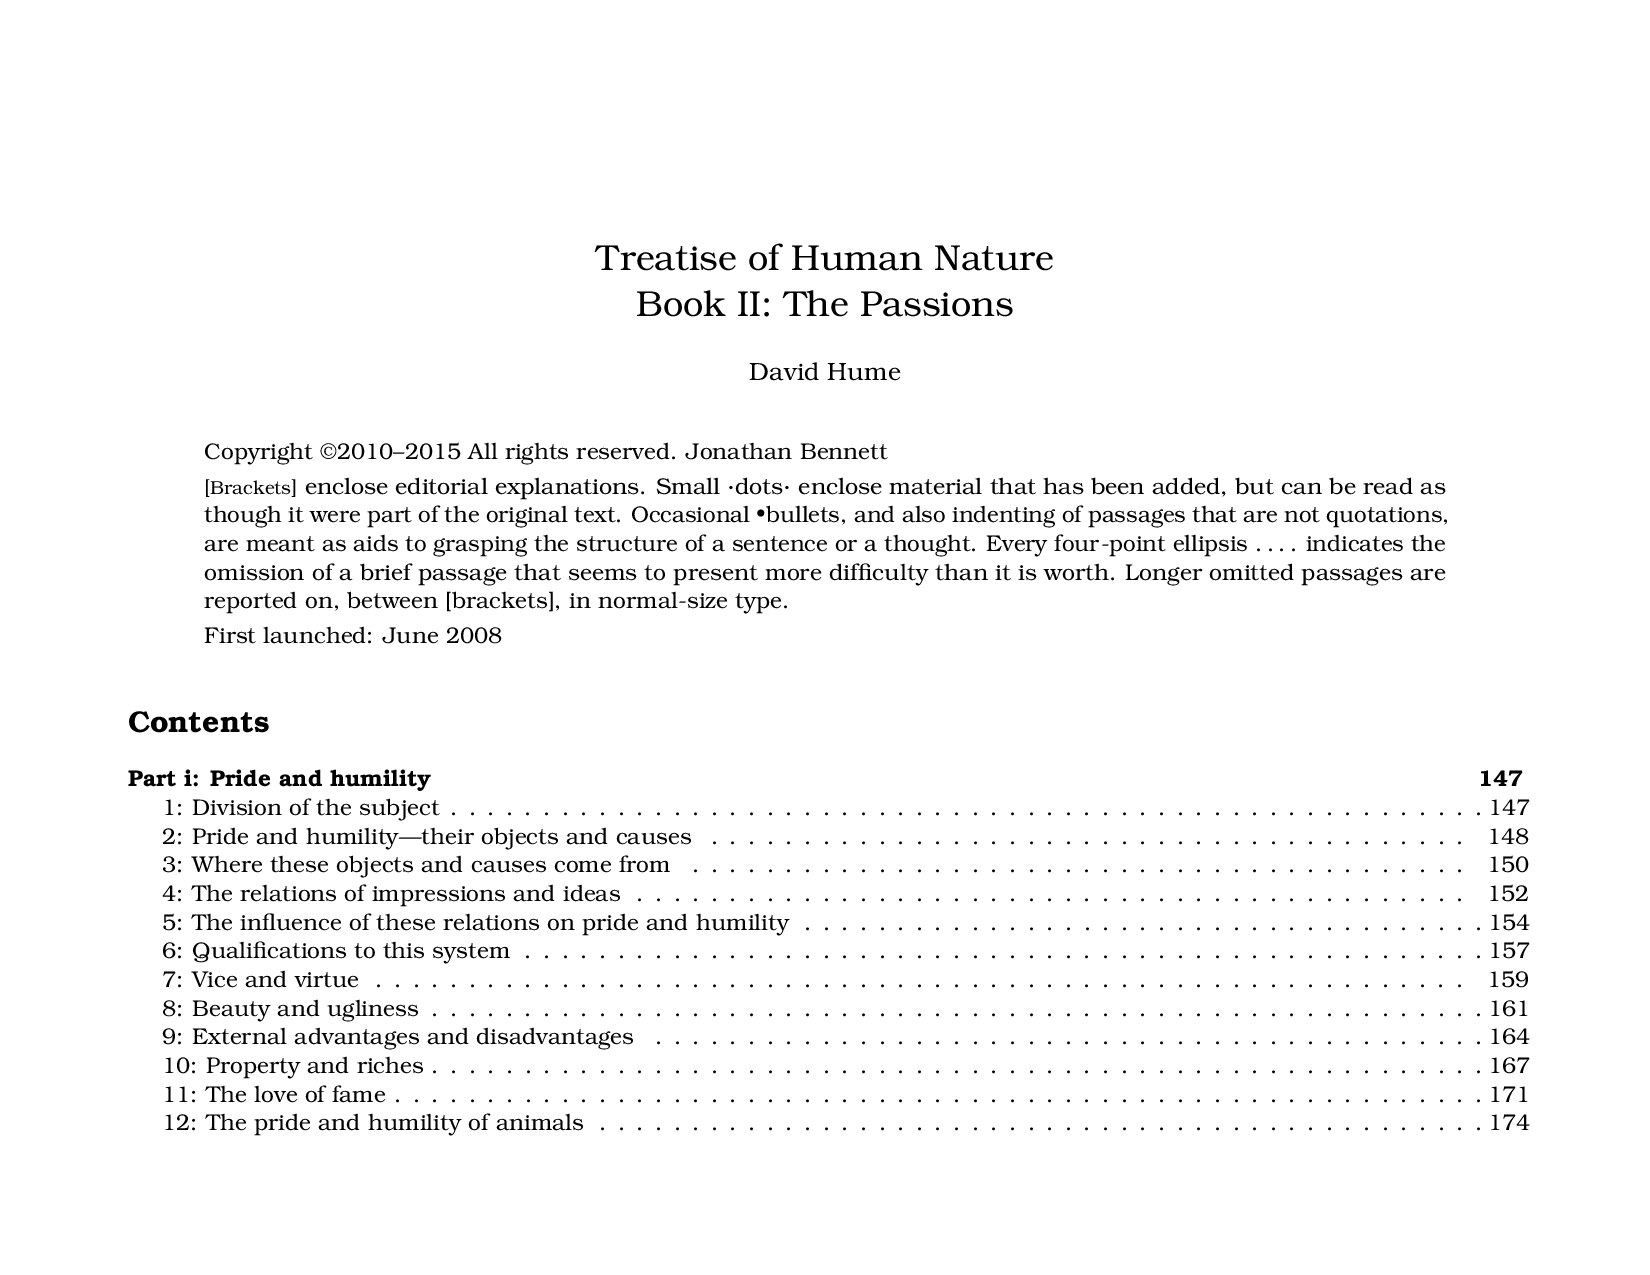 David Hume - Treatise of Human Nature Book 2; The Passions